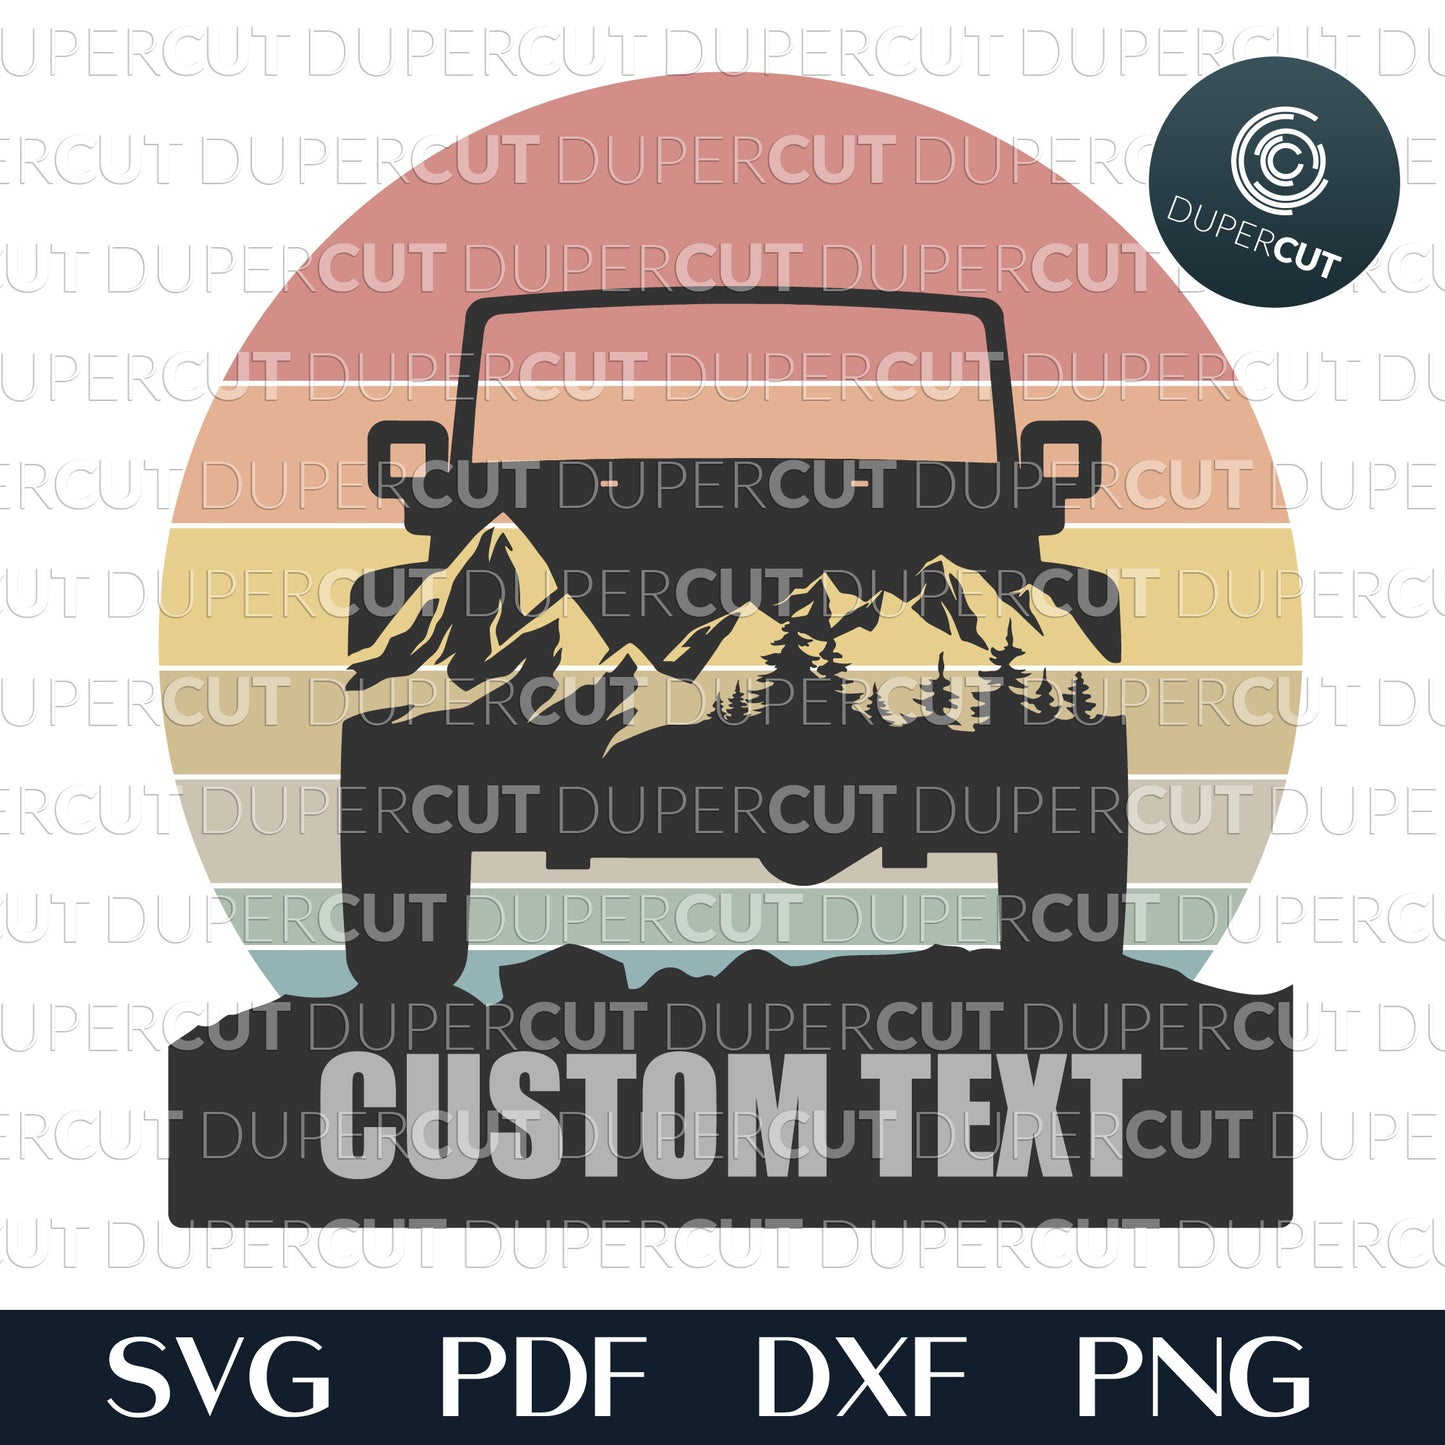 Retro sunset personalized Jeep sign with custom text  - layered files for laser cutting, printing, sublimation. Use with Glowforge, Cricut, Silhouette Cameo, CNC machines